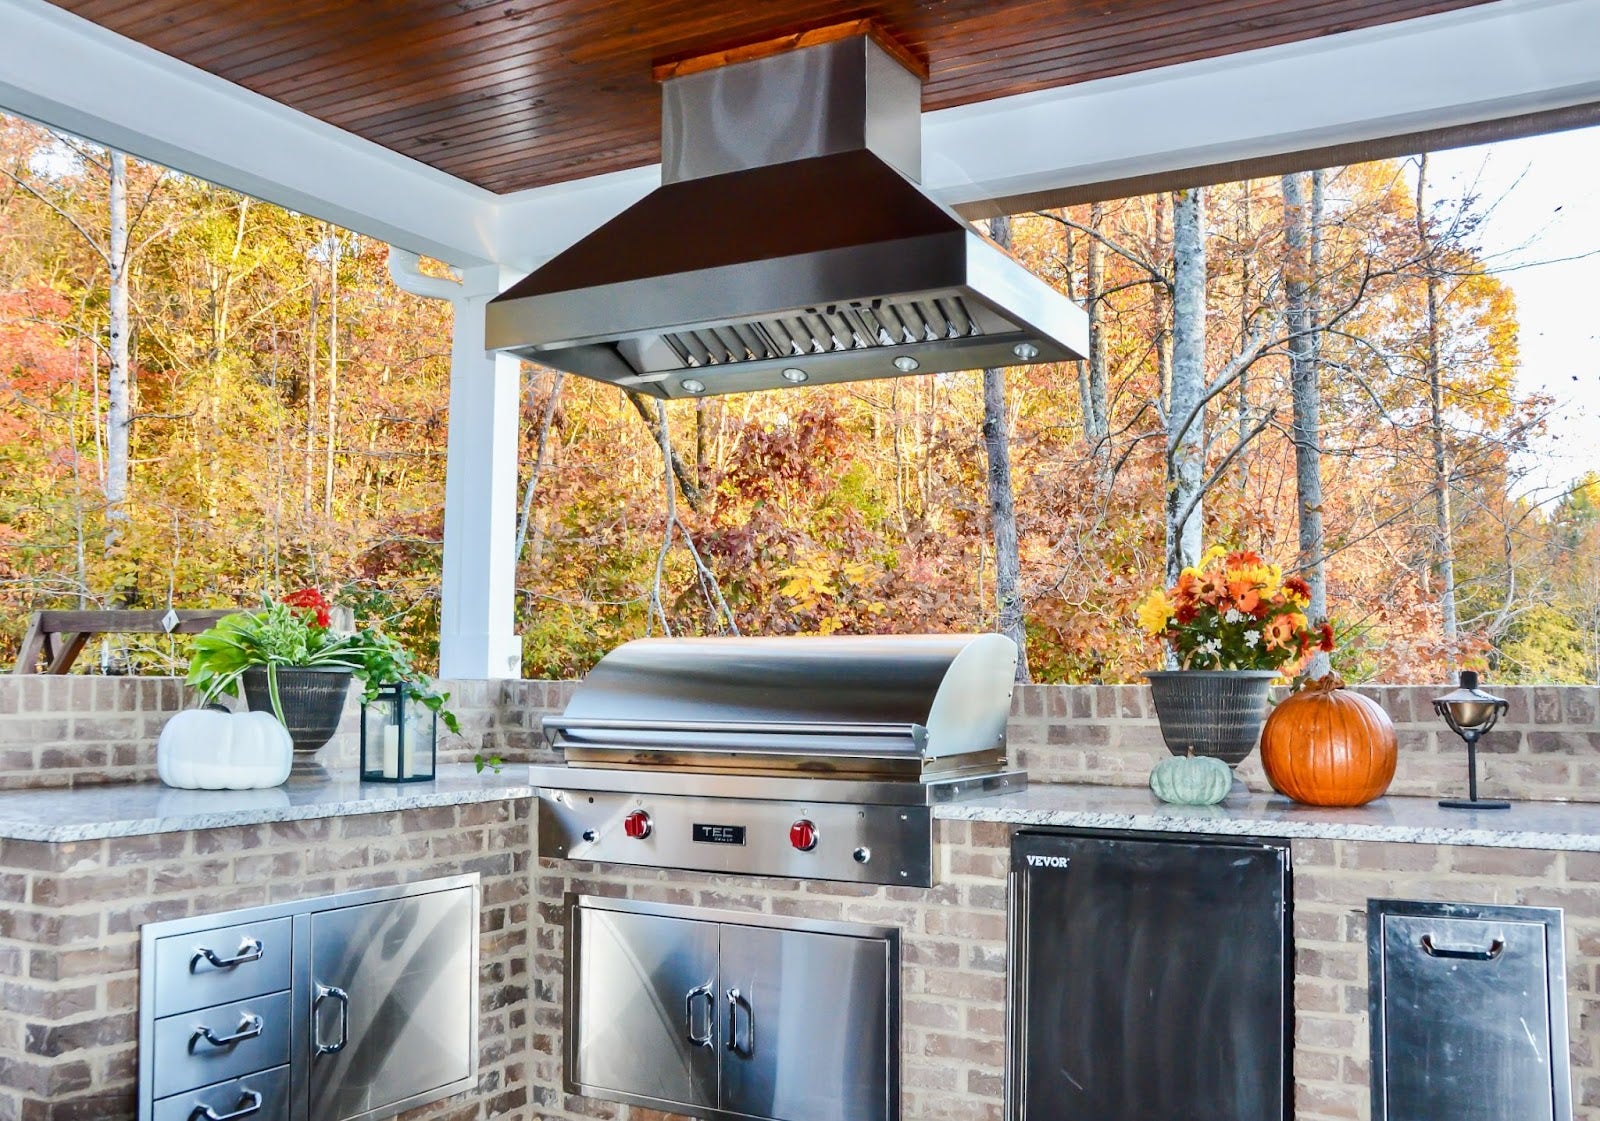 Autumn Kitchen Oasis: Proline hood adds a modern touch to this rustic outdoor kitchen with brickwork. Fall foliage creates a colorful backdrop. Seasonal decor complements the natural beauty. Perfect for grilling and enjoying the harvest season. - Proline Range Hoods - prolinerangehoods.com 